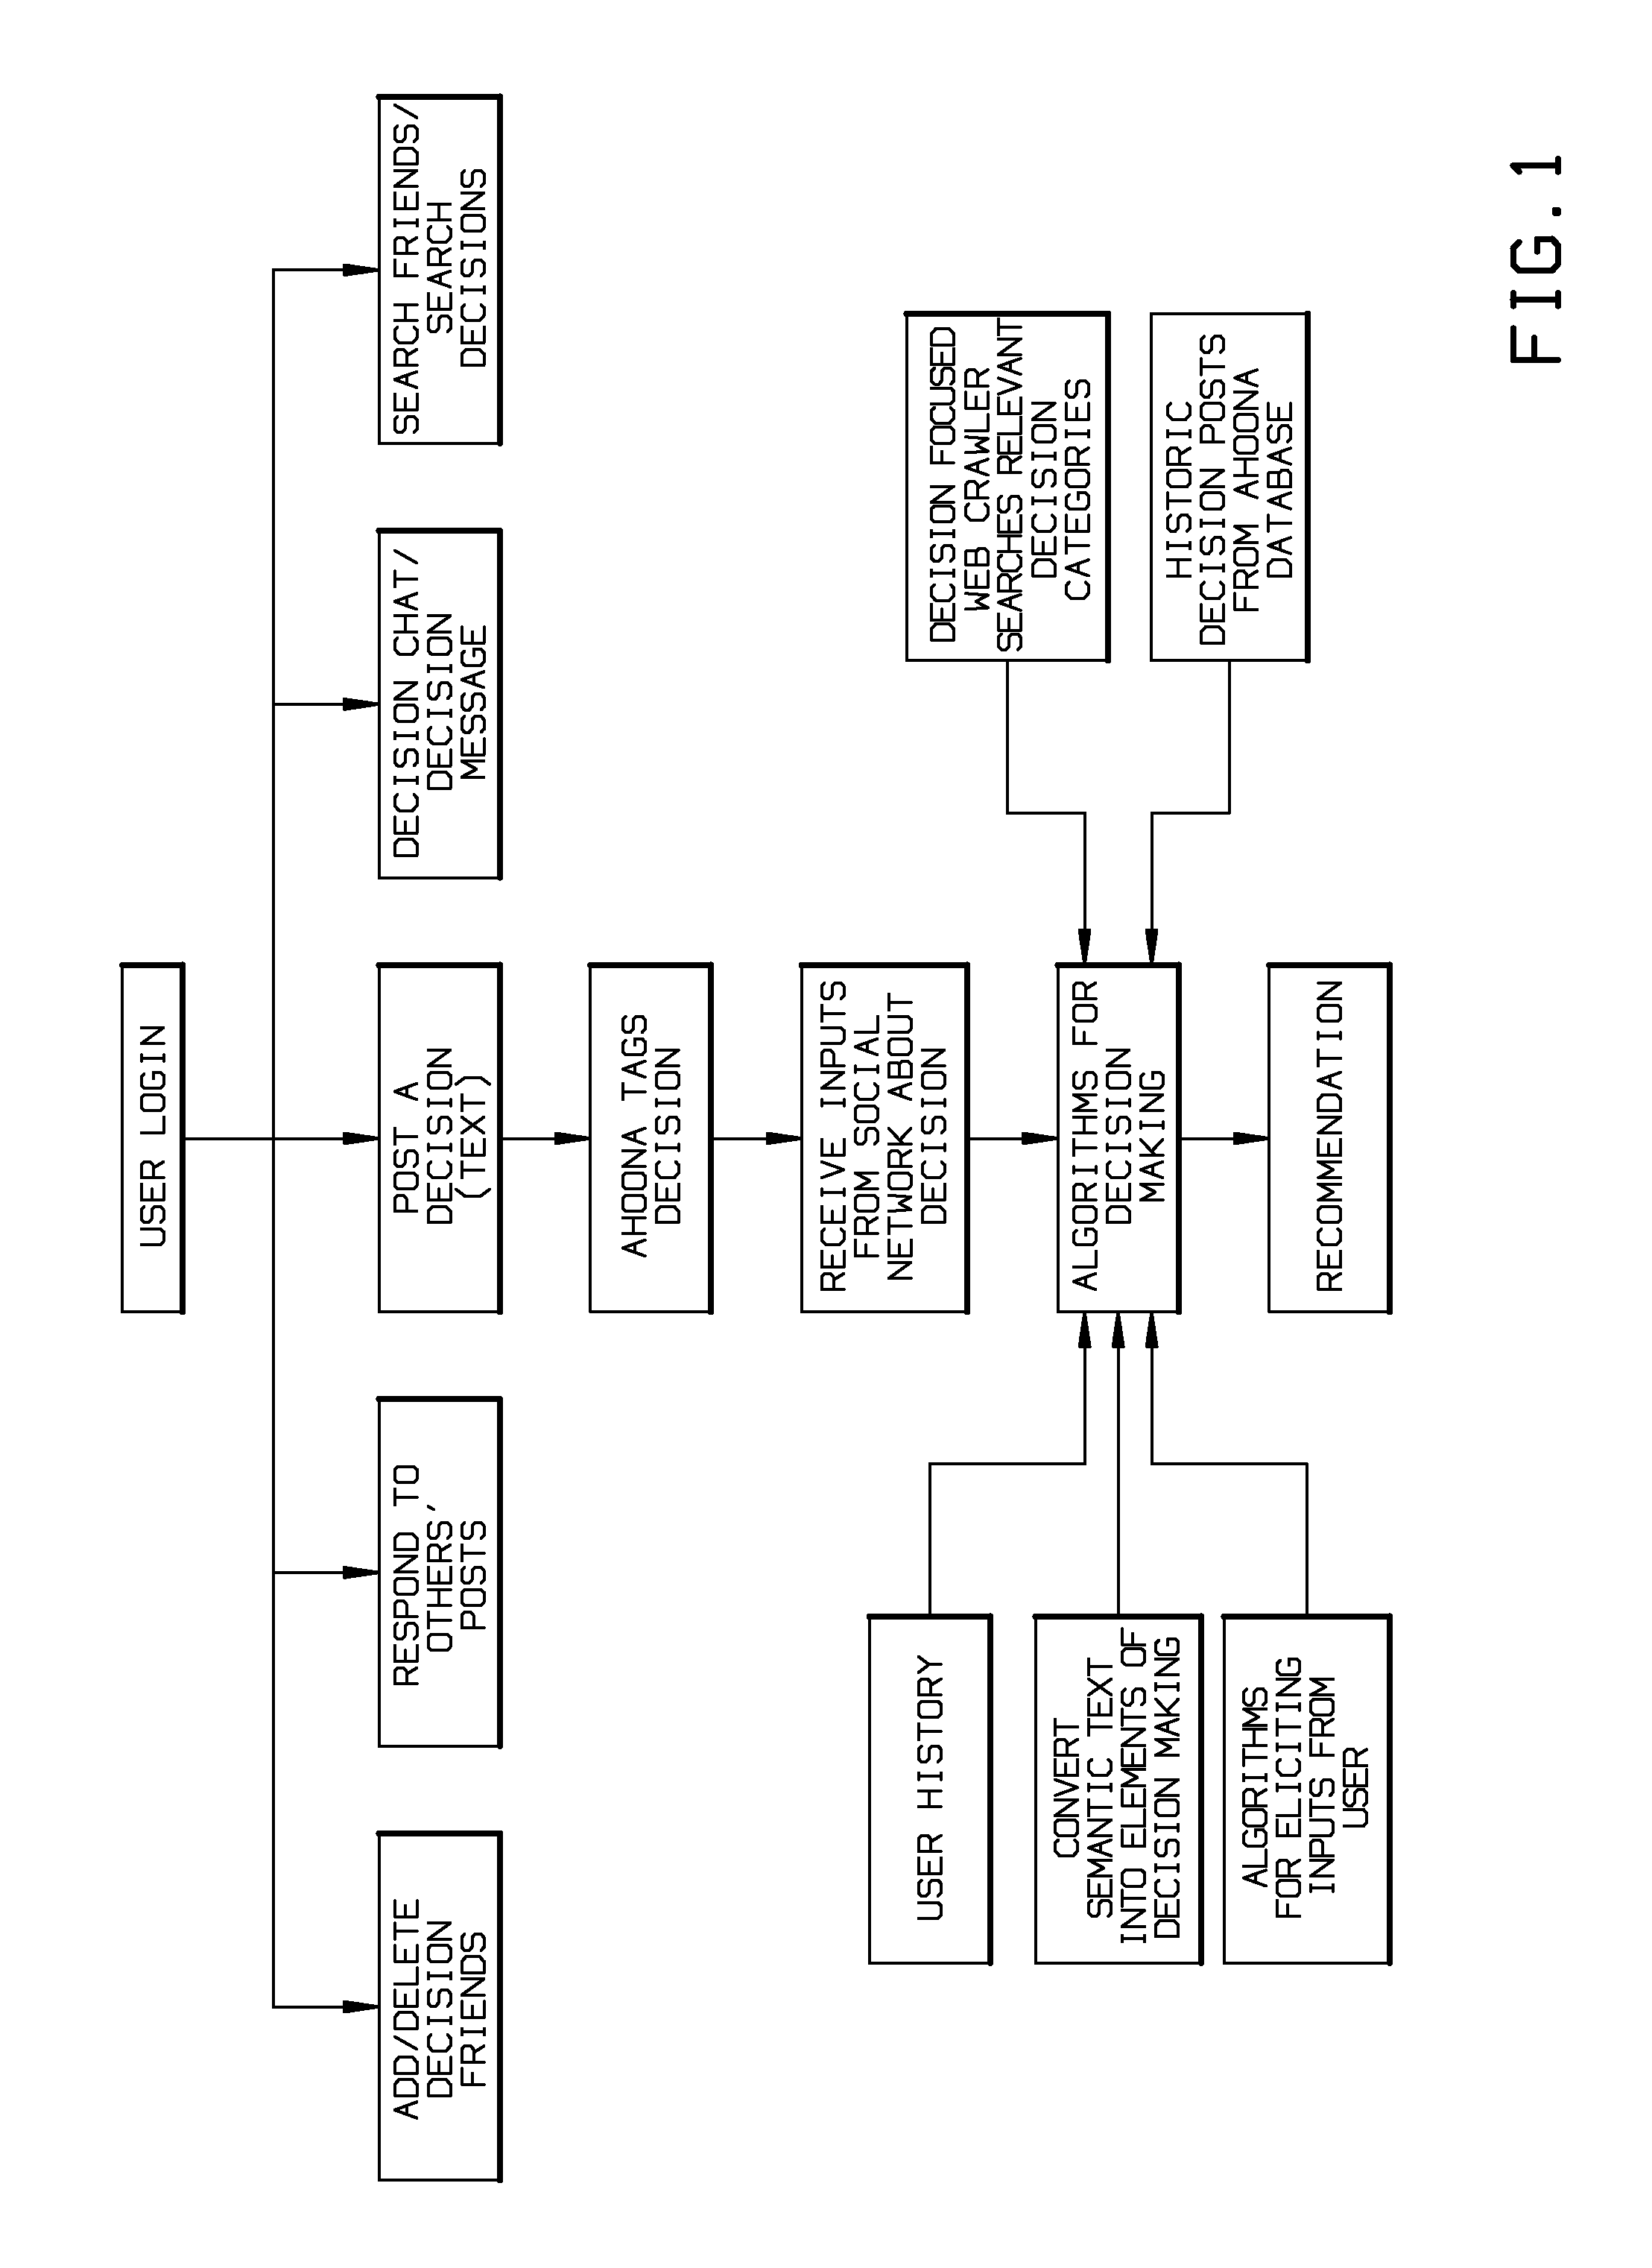 Method, Software, and System for Making a Decision